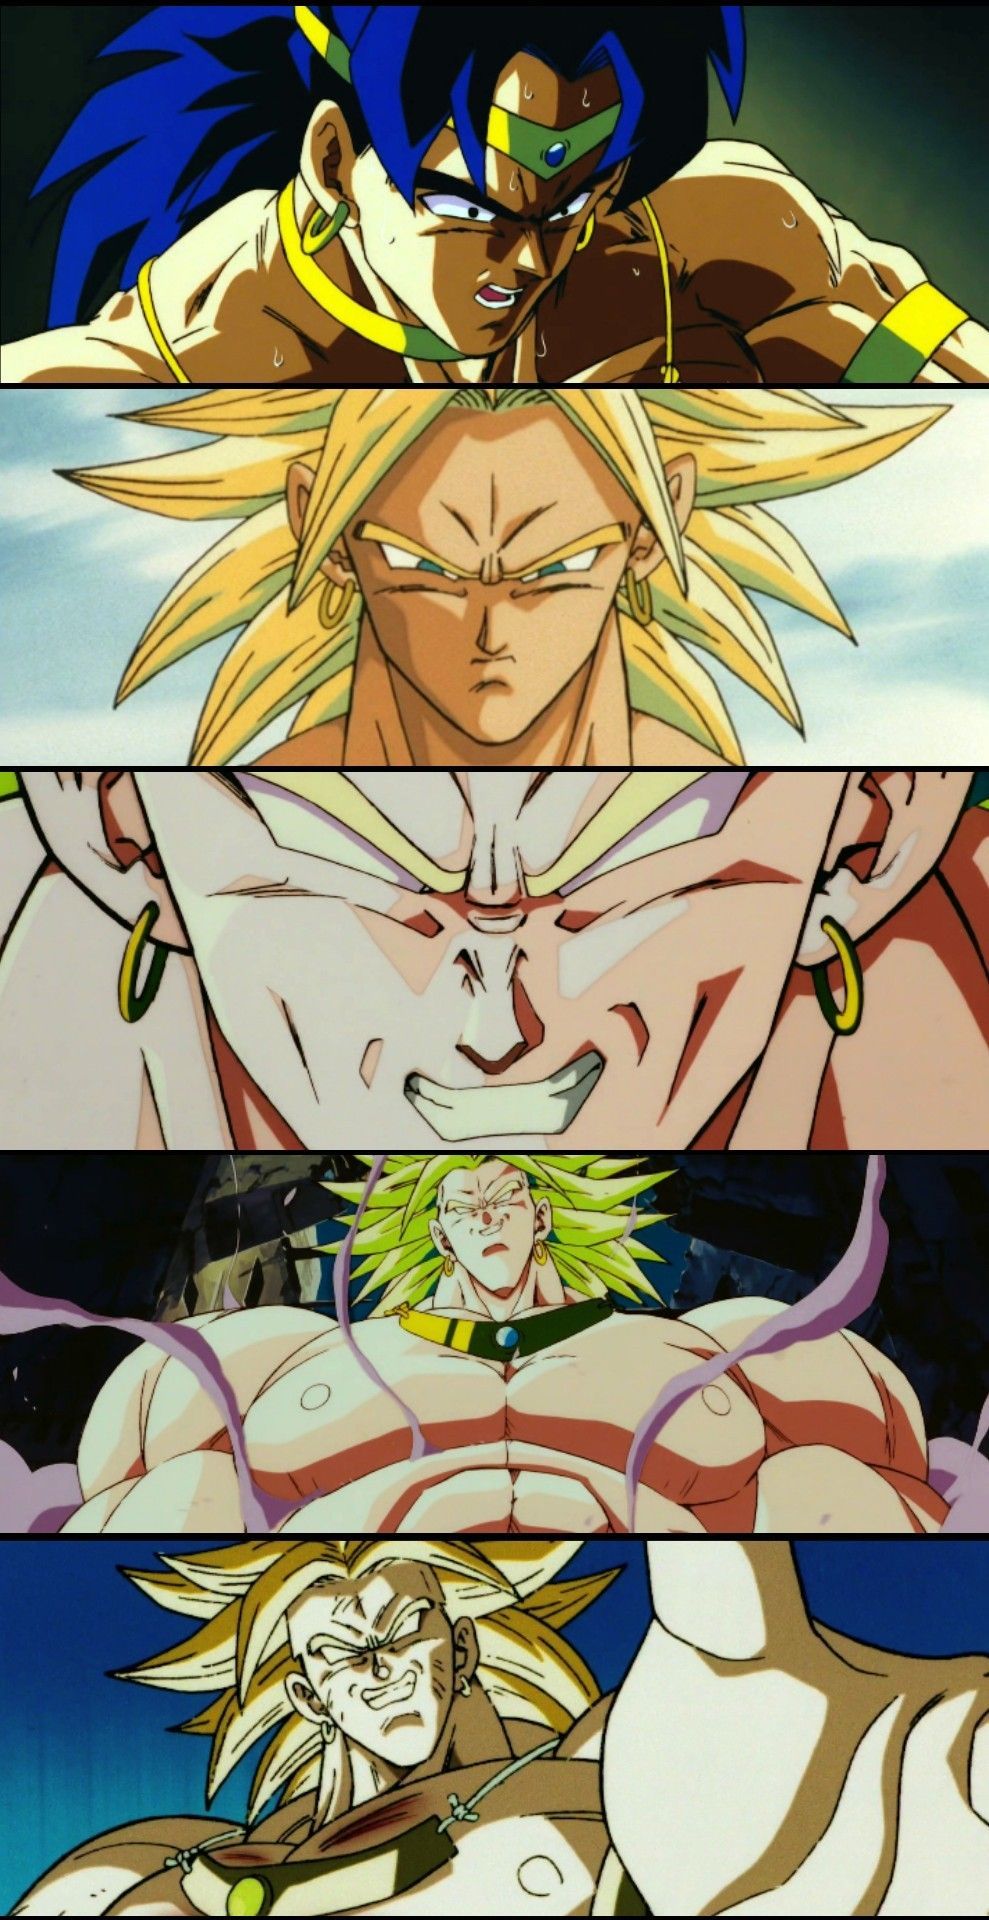 Old Broly from DBZ movies 8th and 9th (1993) & (1994) (MADE BY ME). Anime dragon ball super, Dragon ball image, Anime dragon ball